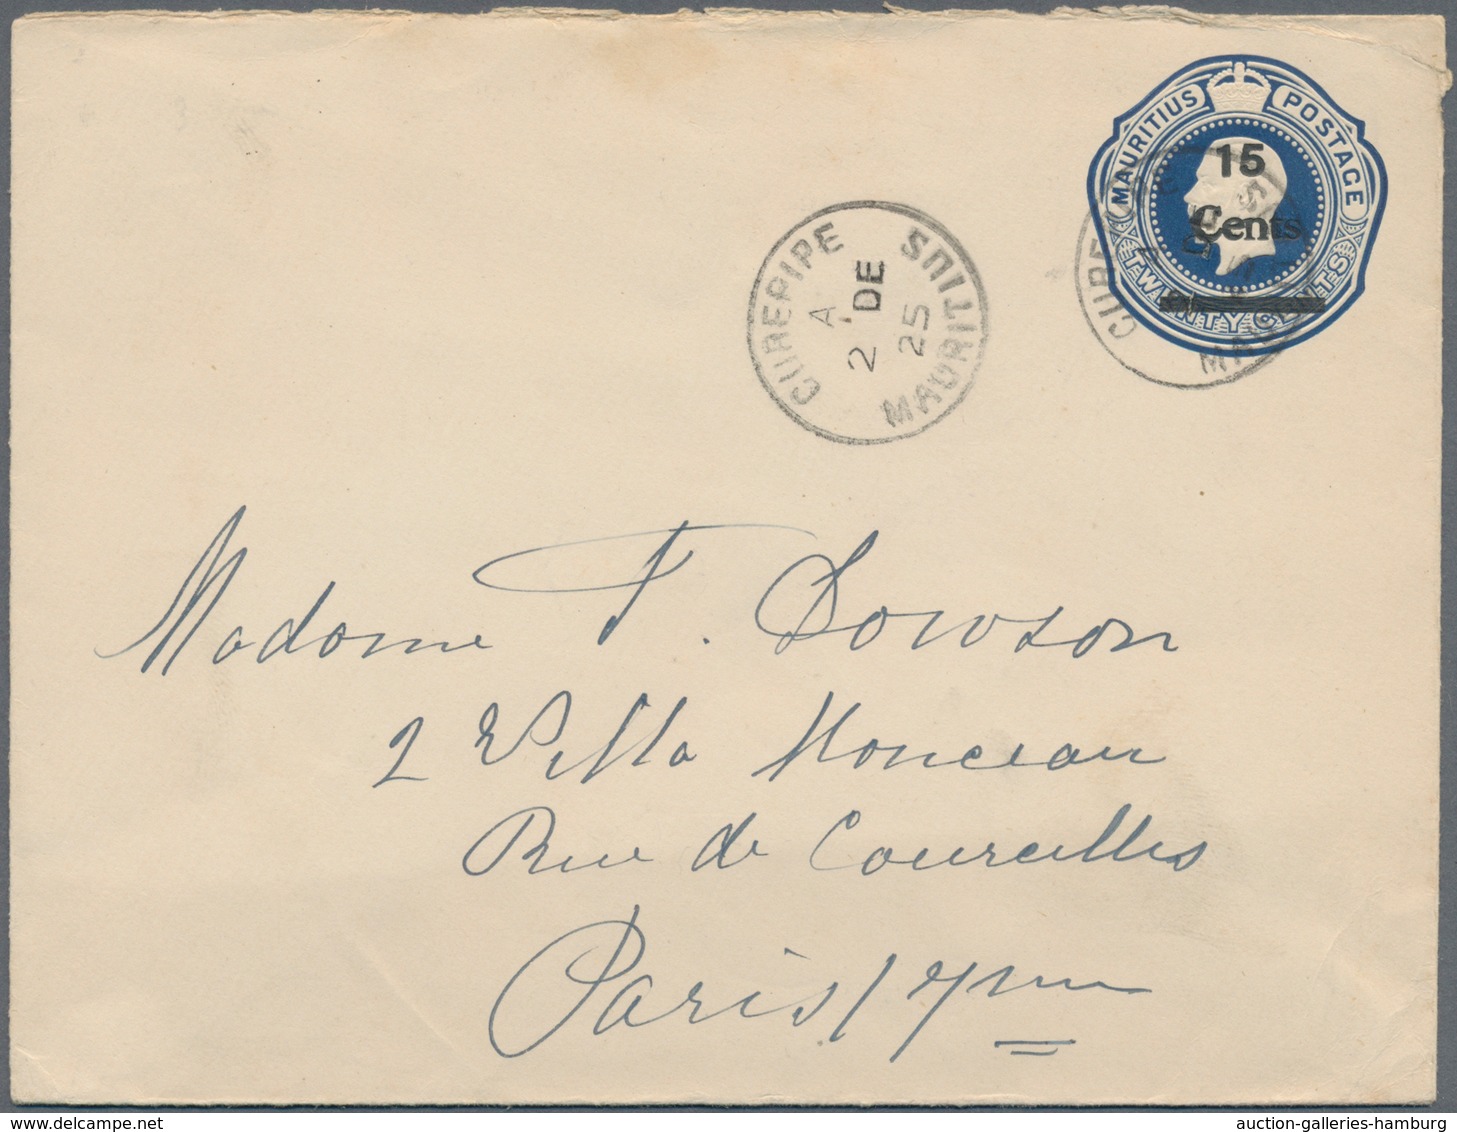 Mauritius: 1925. King George V 20c Blue Envelope Overprinted 15 Cents In Black Cancelled Curepipe A - Maurice (...-1967)